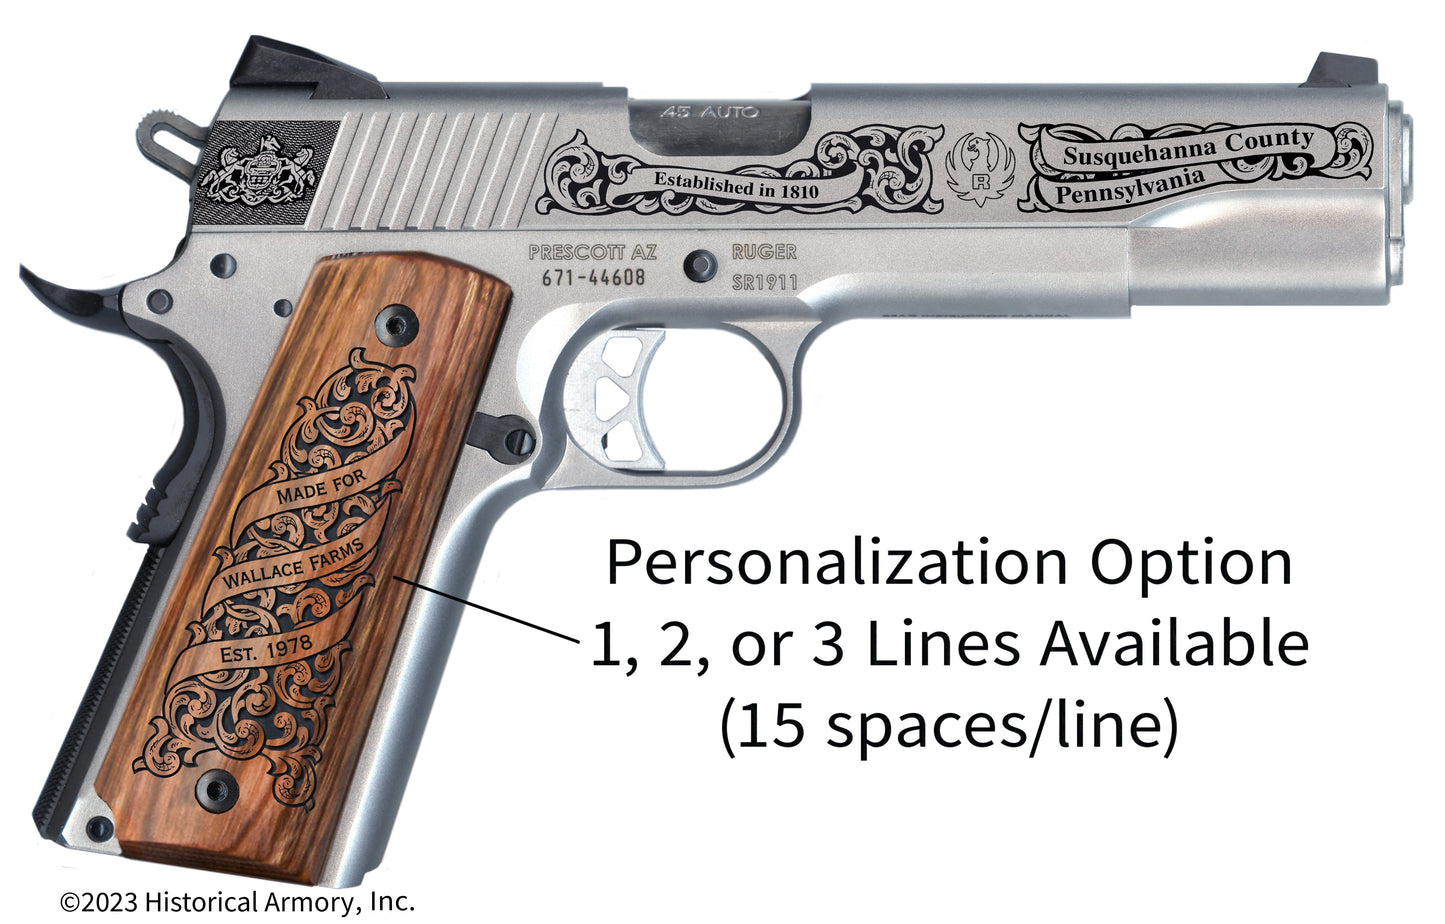 Susquehanna County Pennsylvania Personalized Engraved .45 Auto Ruger 1911